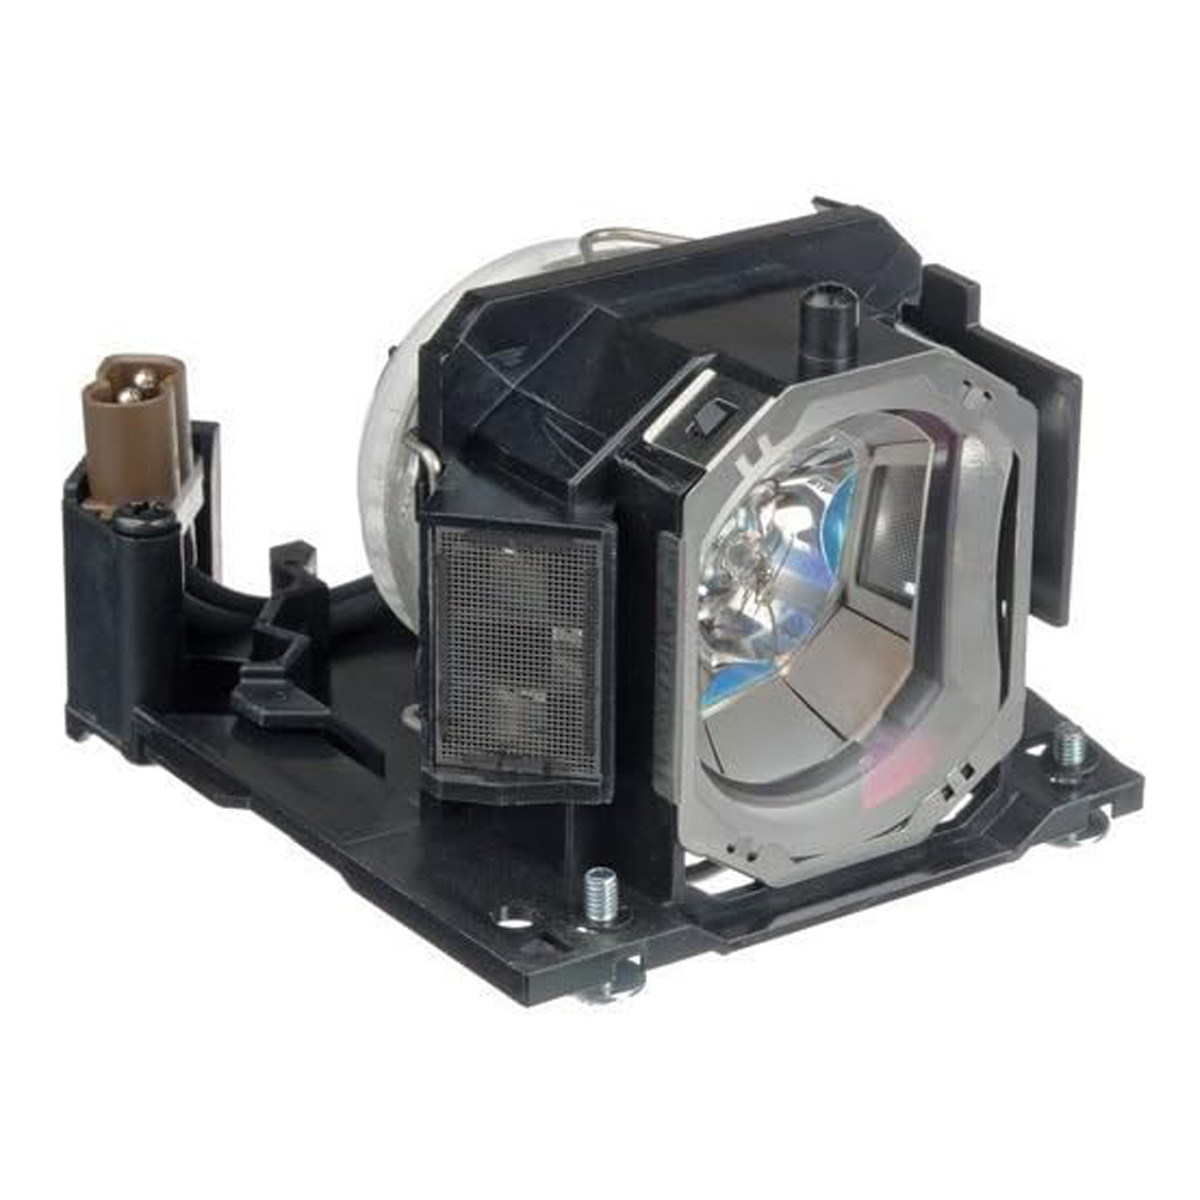 Replacement Projector lamp DT00821 For Hitachi CP-X3 CP-X3W CP-X5